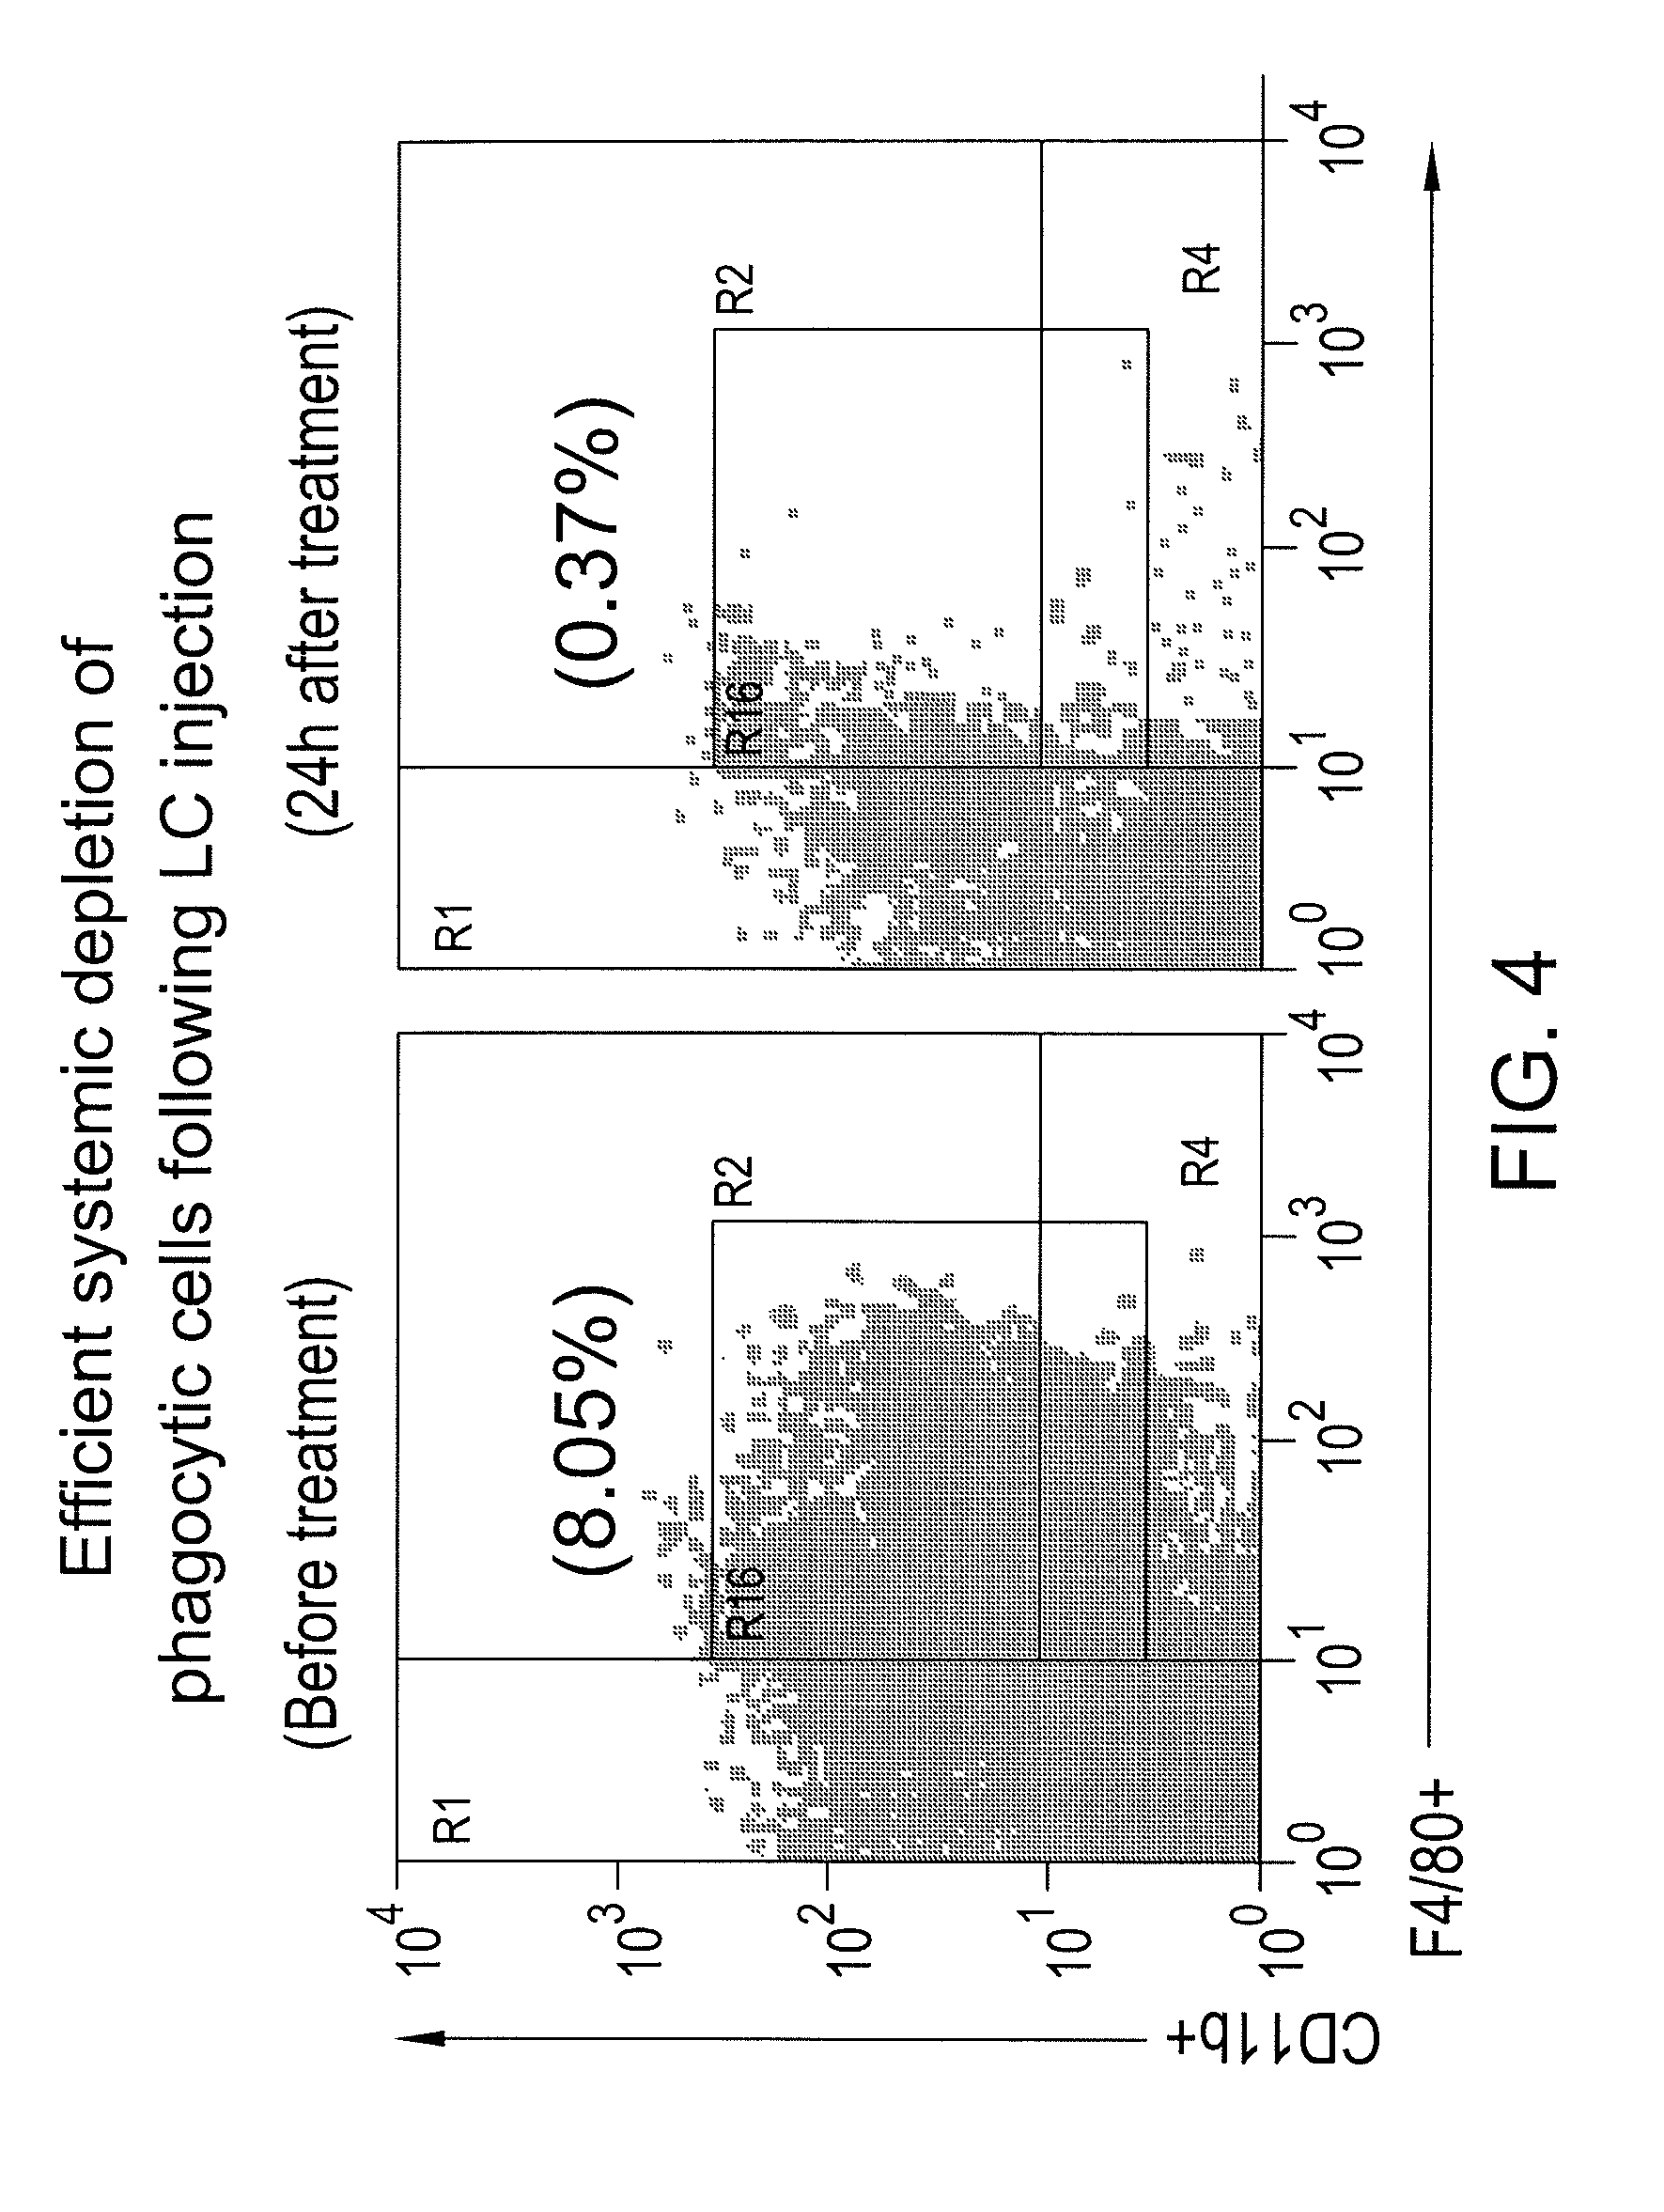 Myeloid derived suppressor cell inhibiting agents